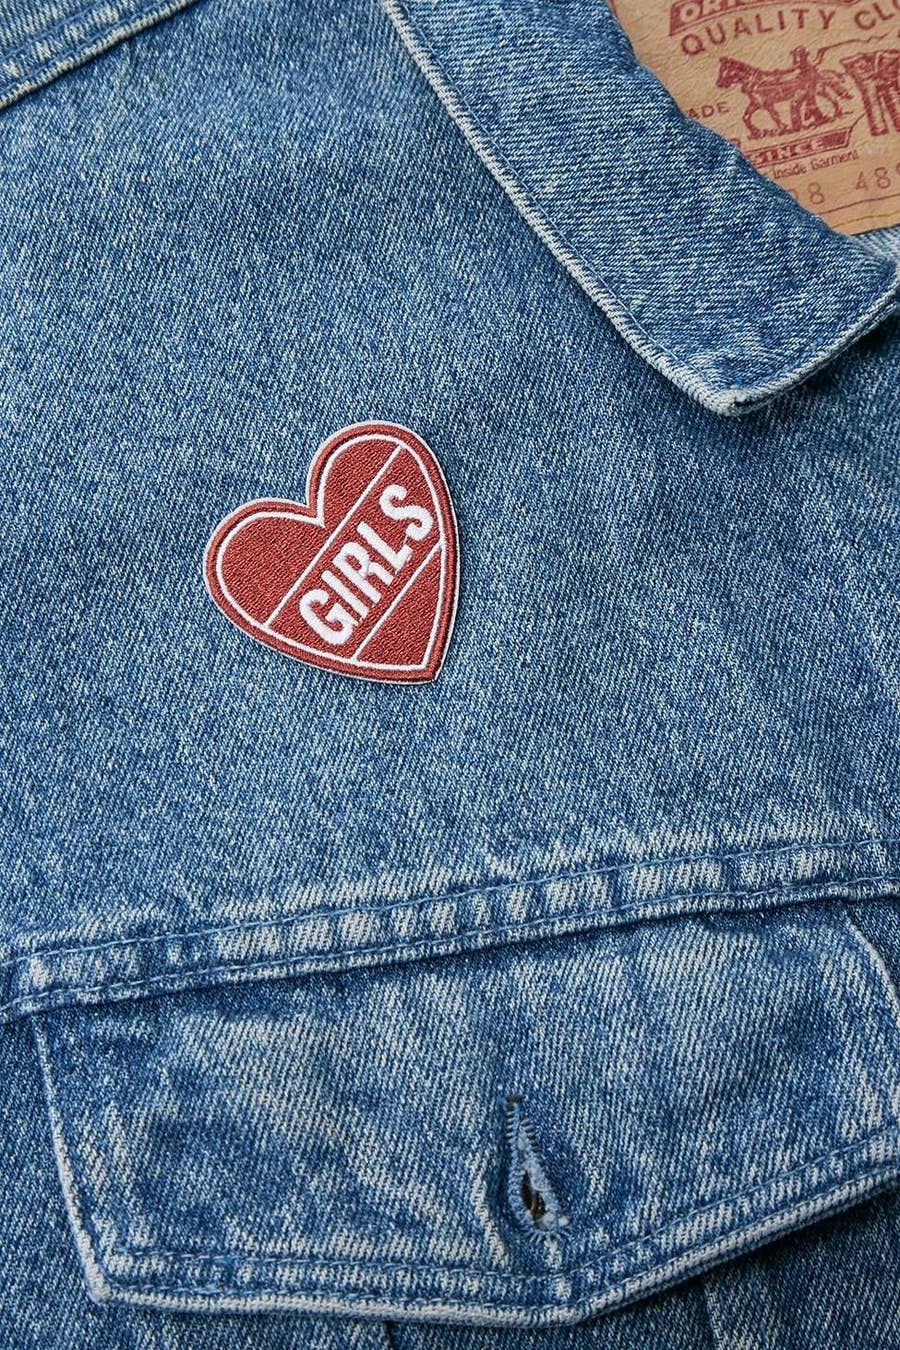 21 Really Fucking Cool Iron-On Patches Your Jacket Needs Right Now